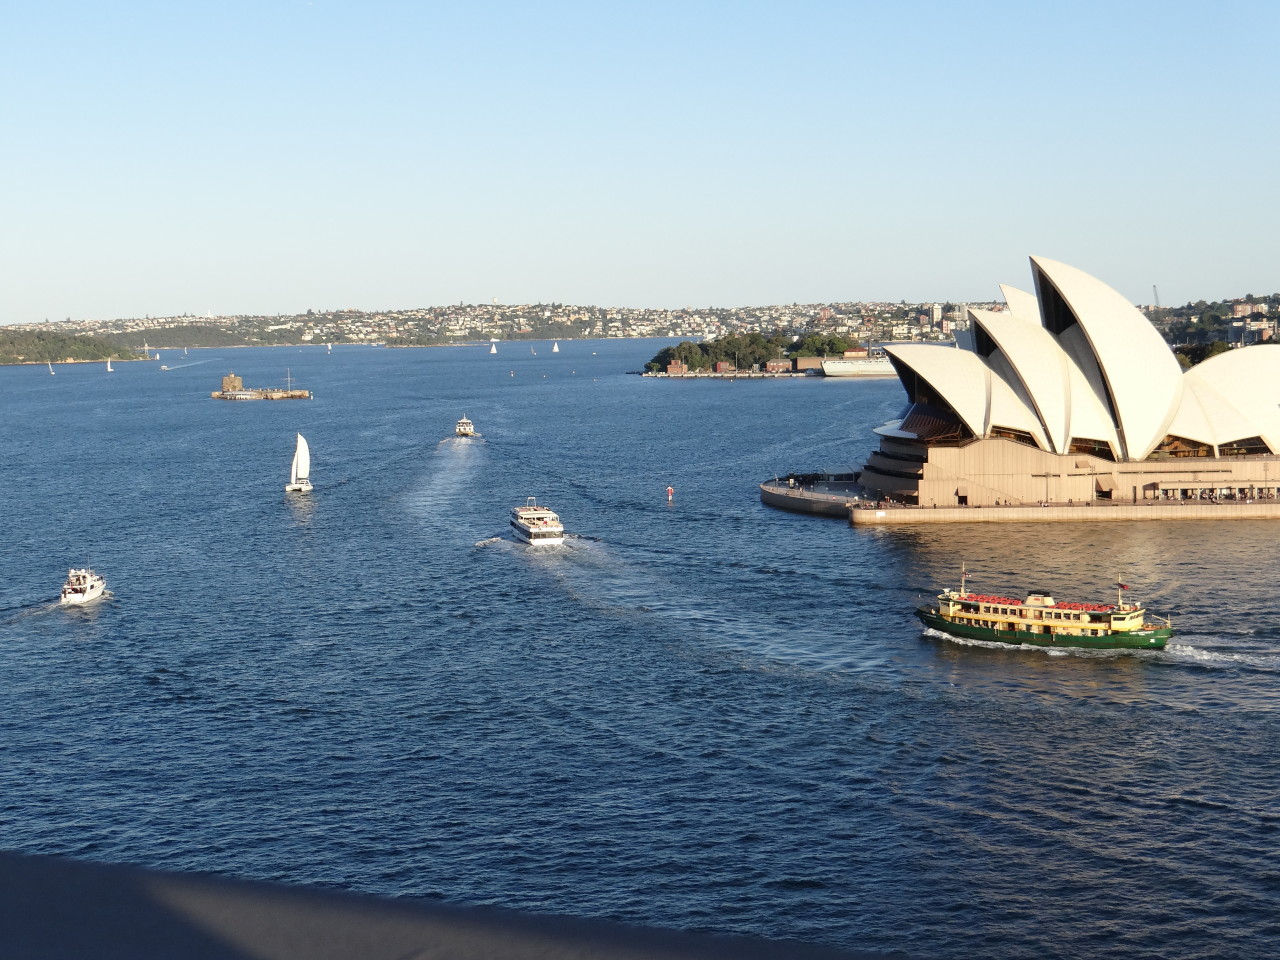 View of Sydney Opera House from the Harbour bridge